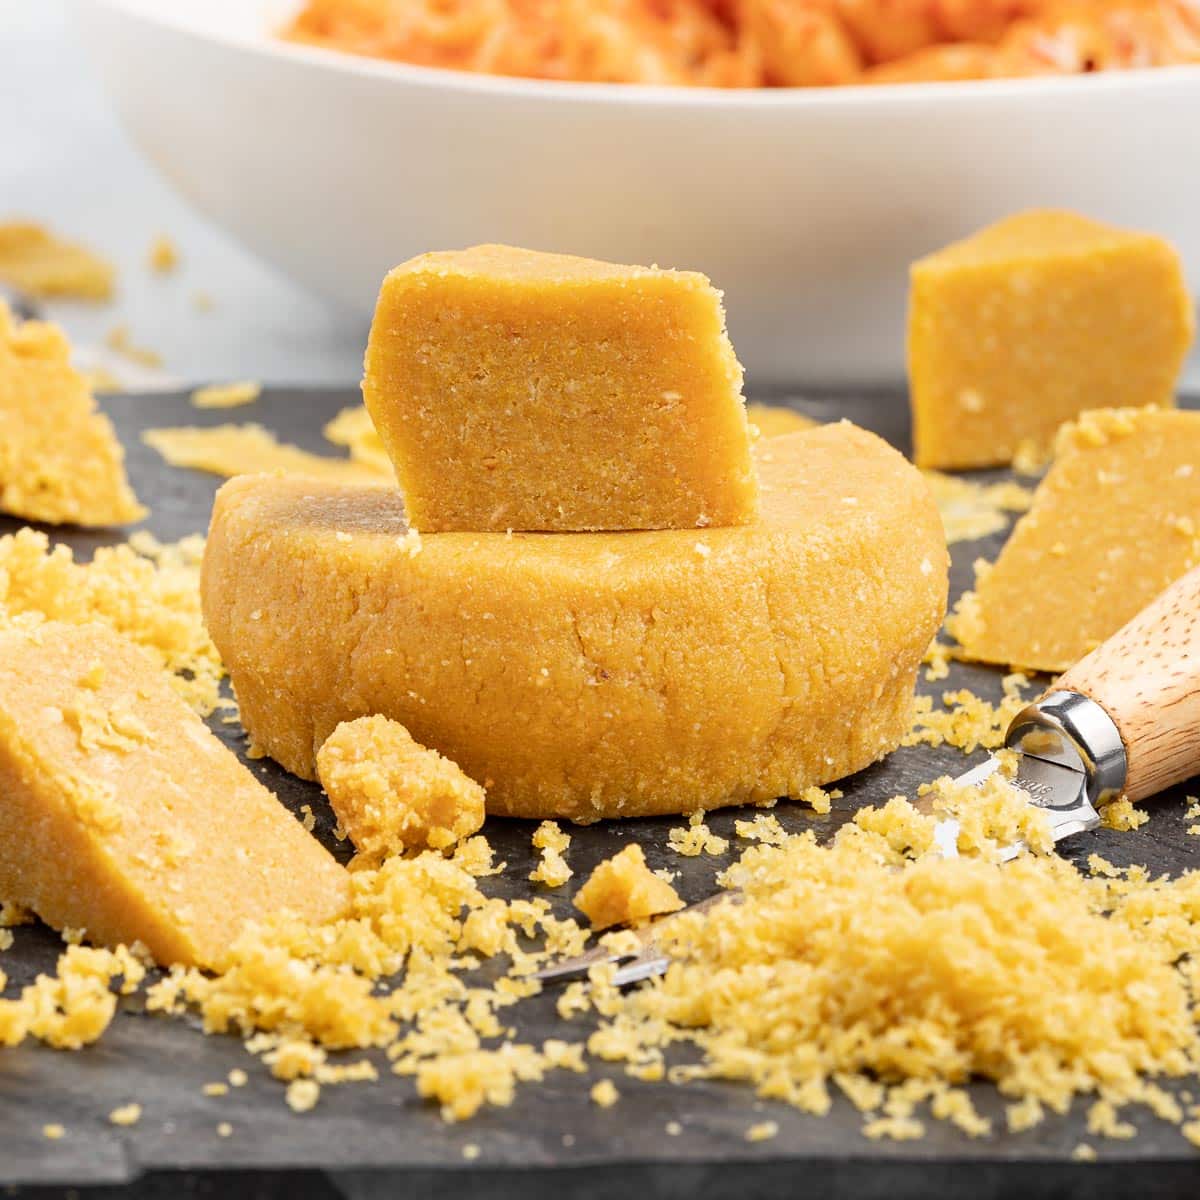 a wheel of vegan parmesan that has had wedges cut out and some grated